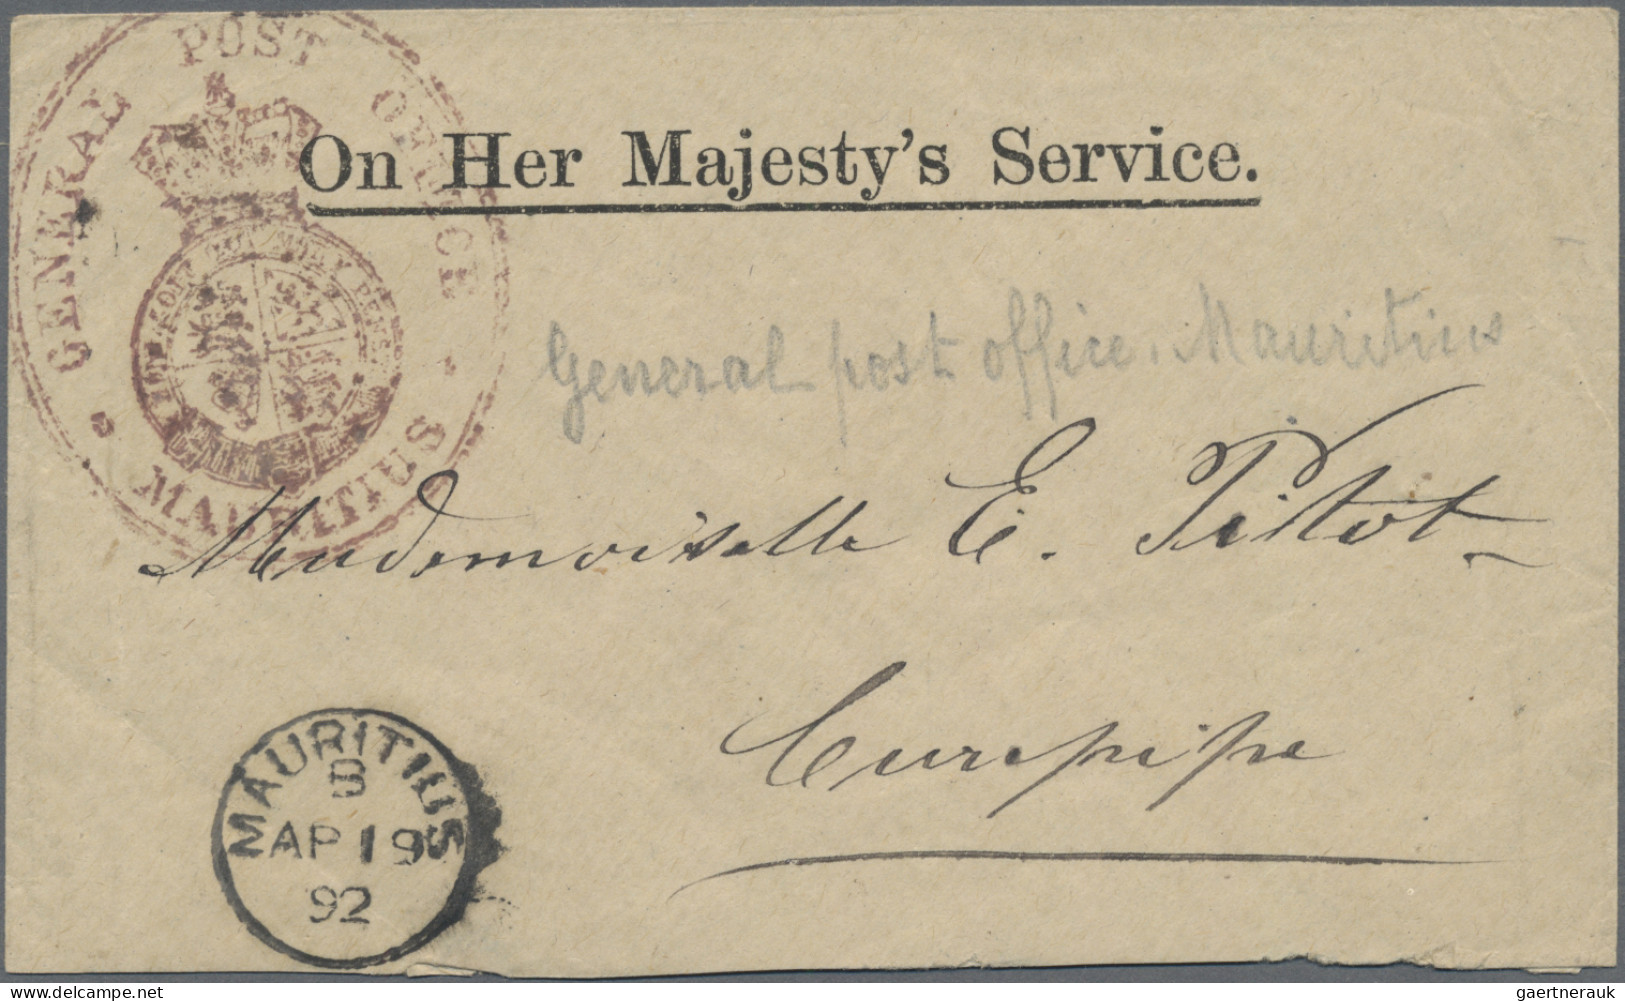 Mauritius: 1892, Small Size OHMS Cover With Large Reddish-brown Crown Seal Mark - Maurice (...-1967)